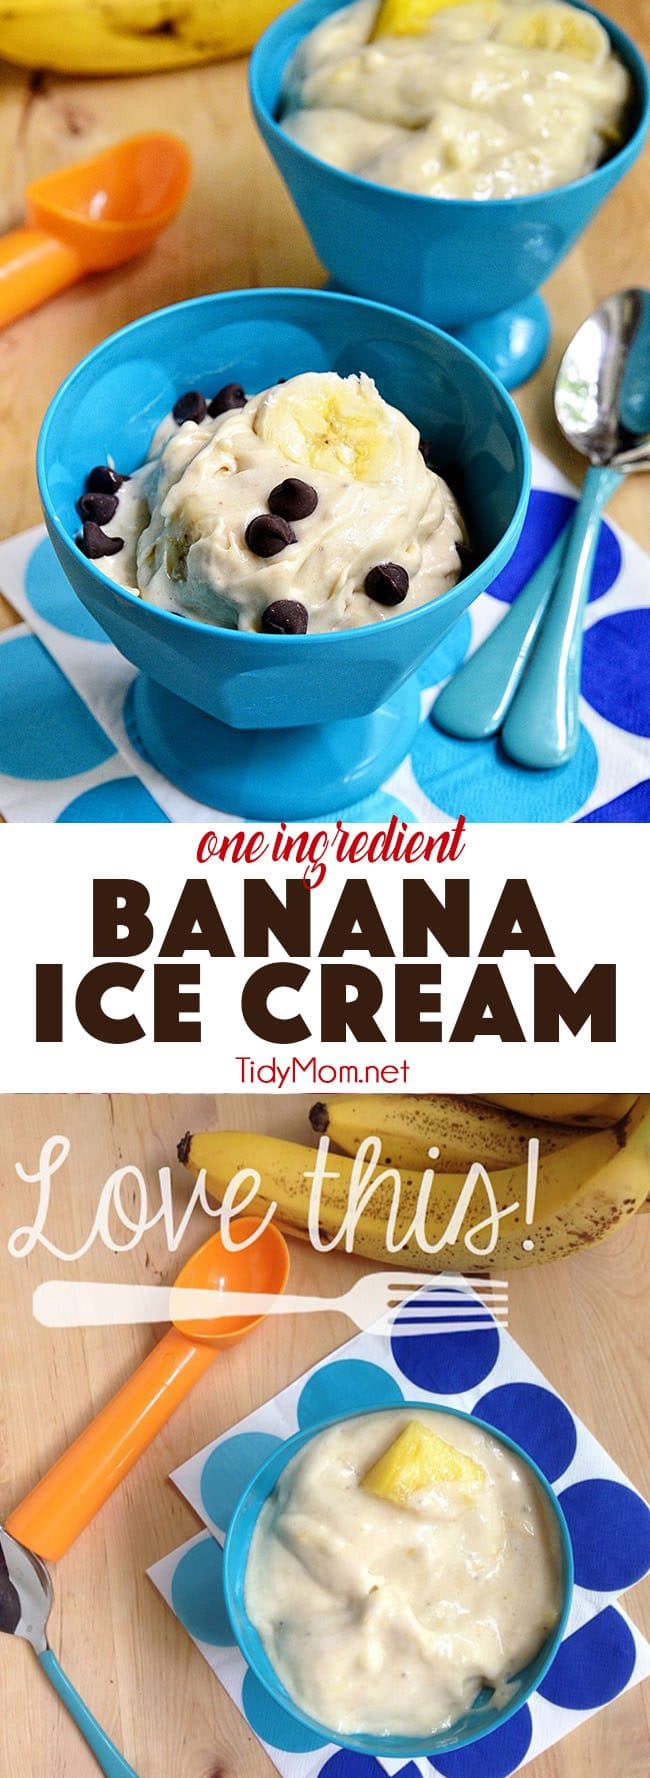 ONE INGREDIENT BANANA ICE CREAM! That’s right, just pulverize frozen bananas for this creamy frozen treat…..just like ice cream! details at TidyMom.net